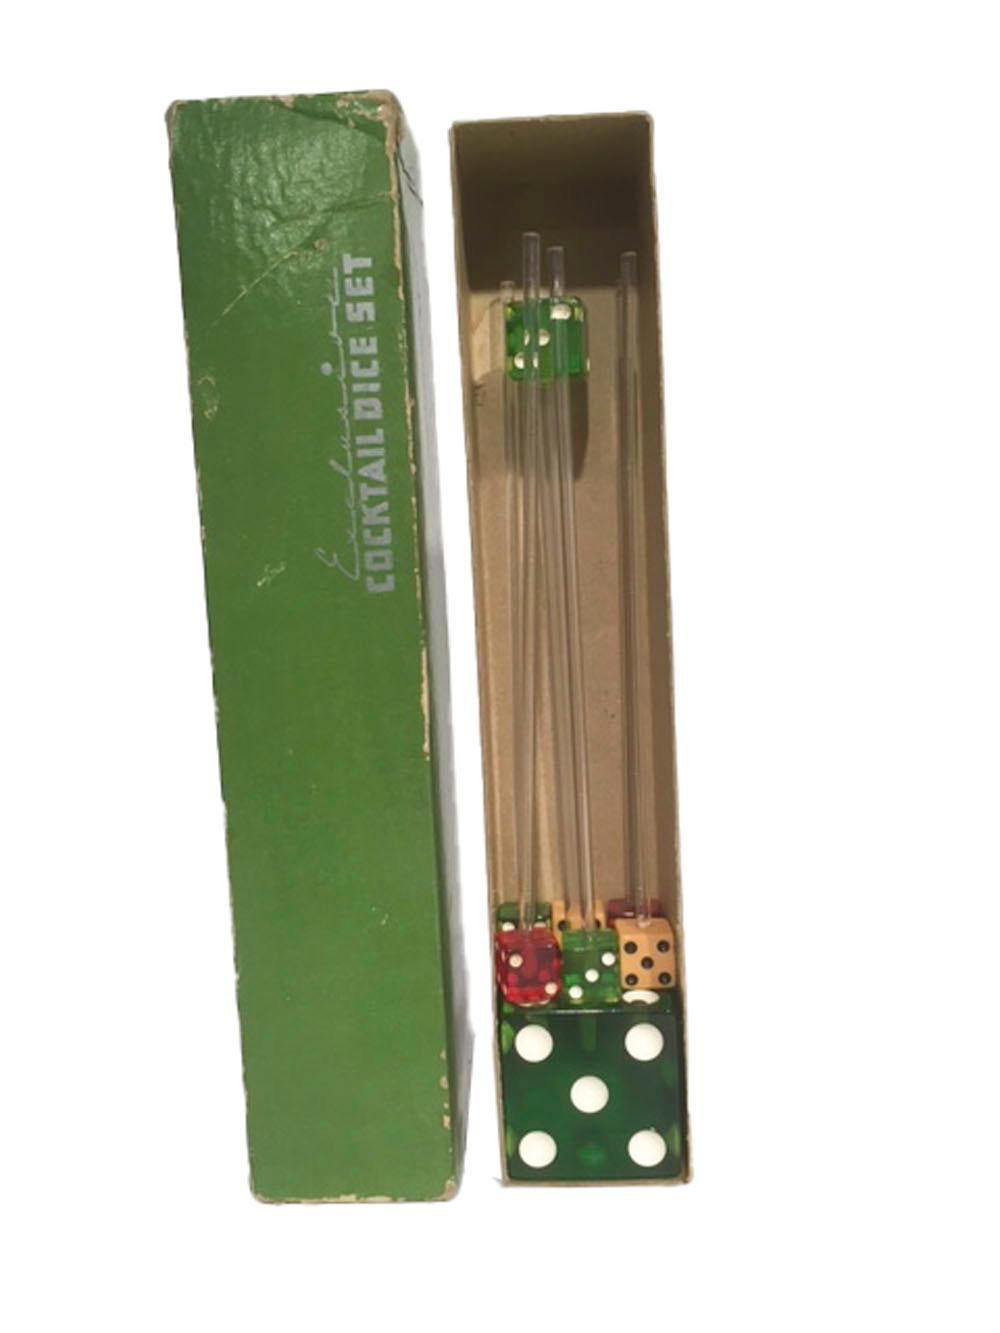 American Vintage Dice Cocktail Set, Swizzle Sticks by Exclusive Playing Card Co.